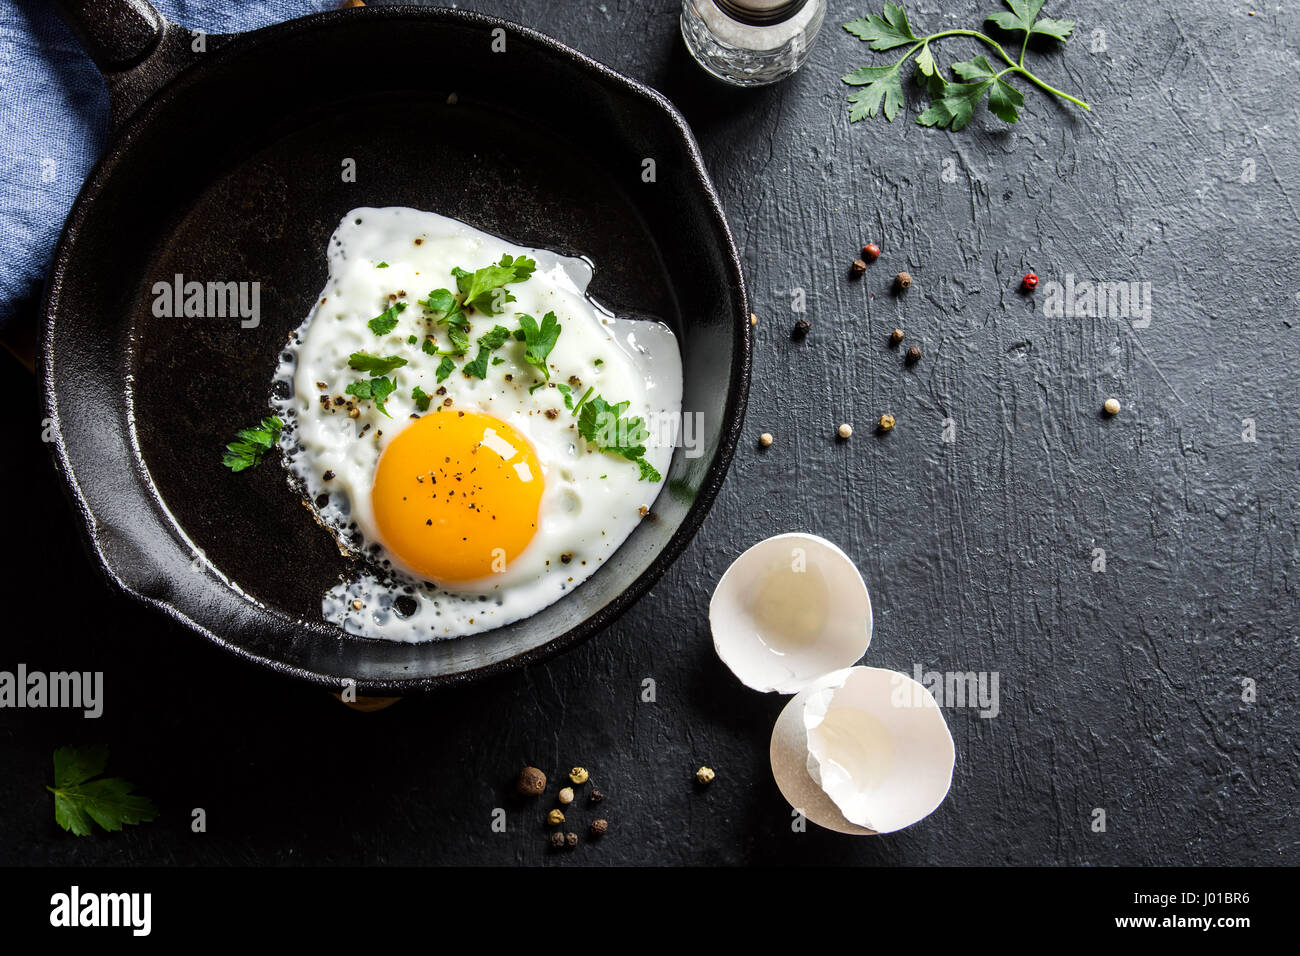 Fried egg. Close up view of the fried egg on a frying pan. Salted and spiced fried egg with parsley on cast iron pan and black background. Stock Photo